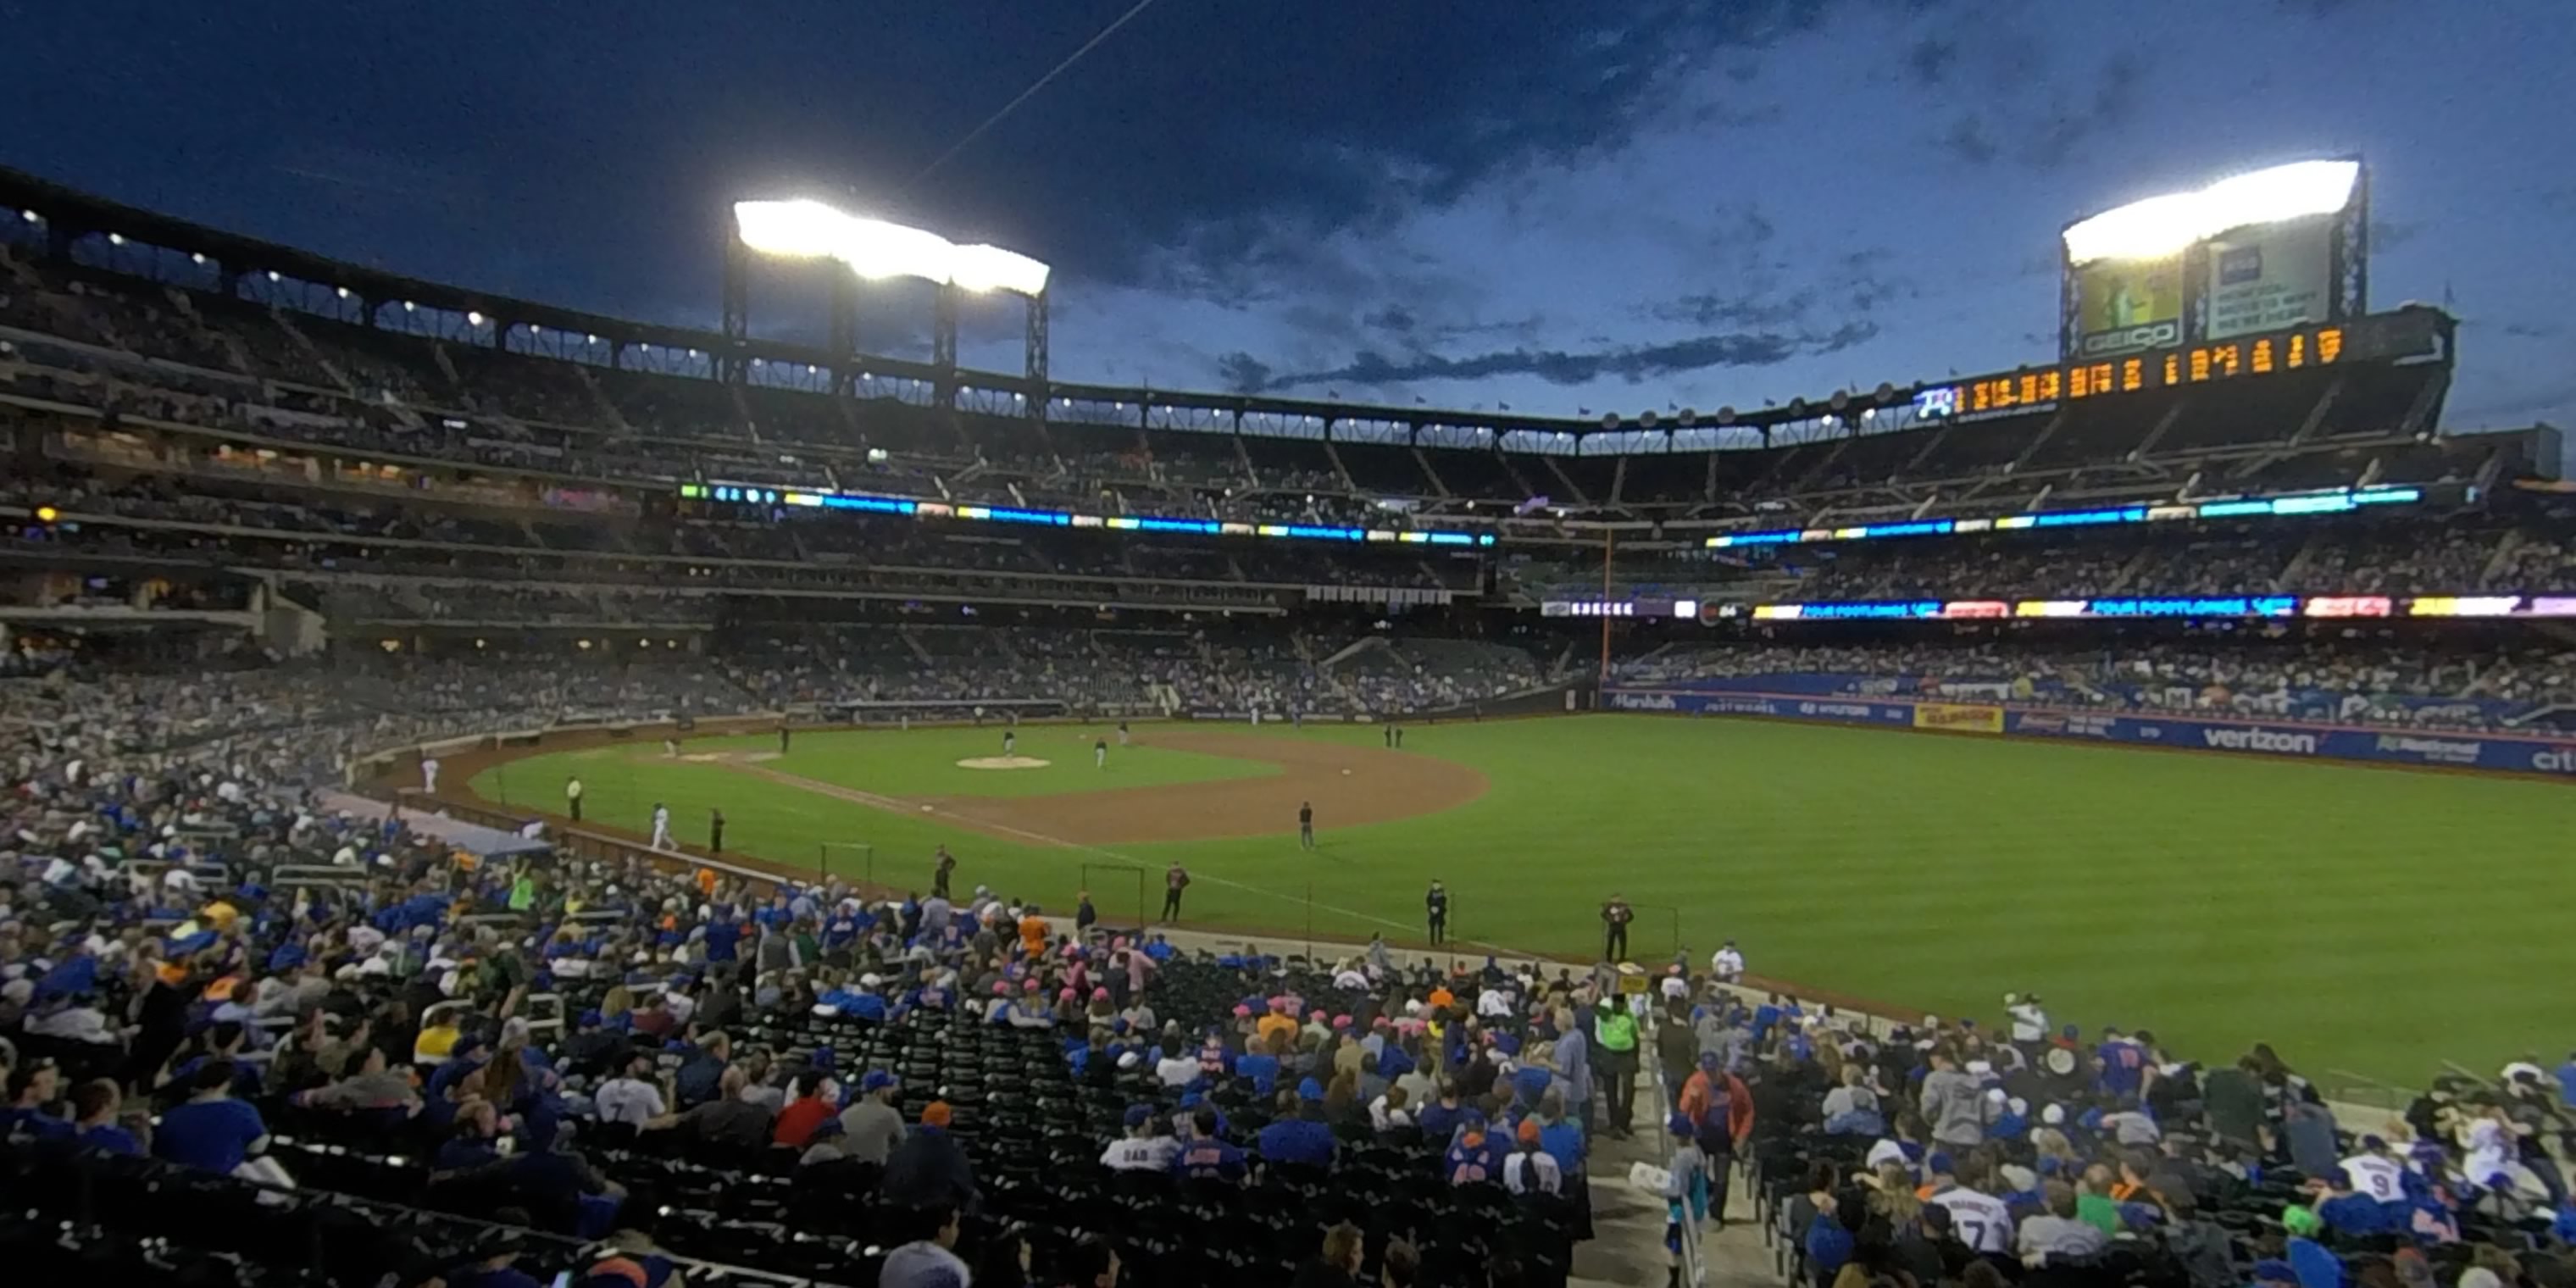 section 108 panoramic seat view  - citi field